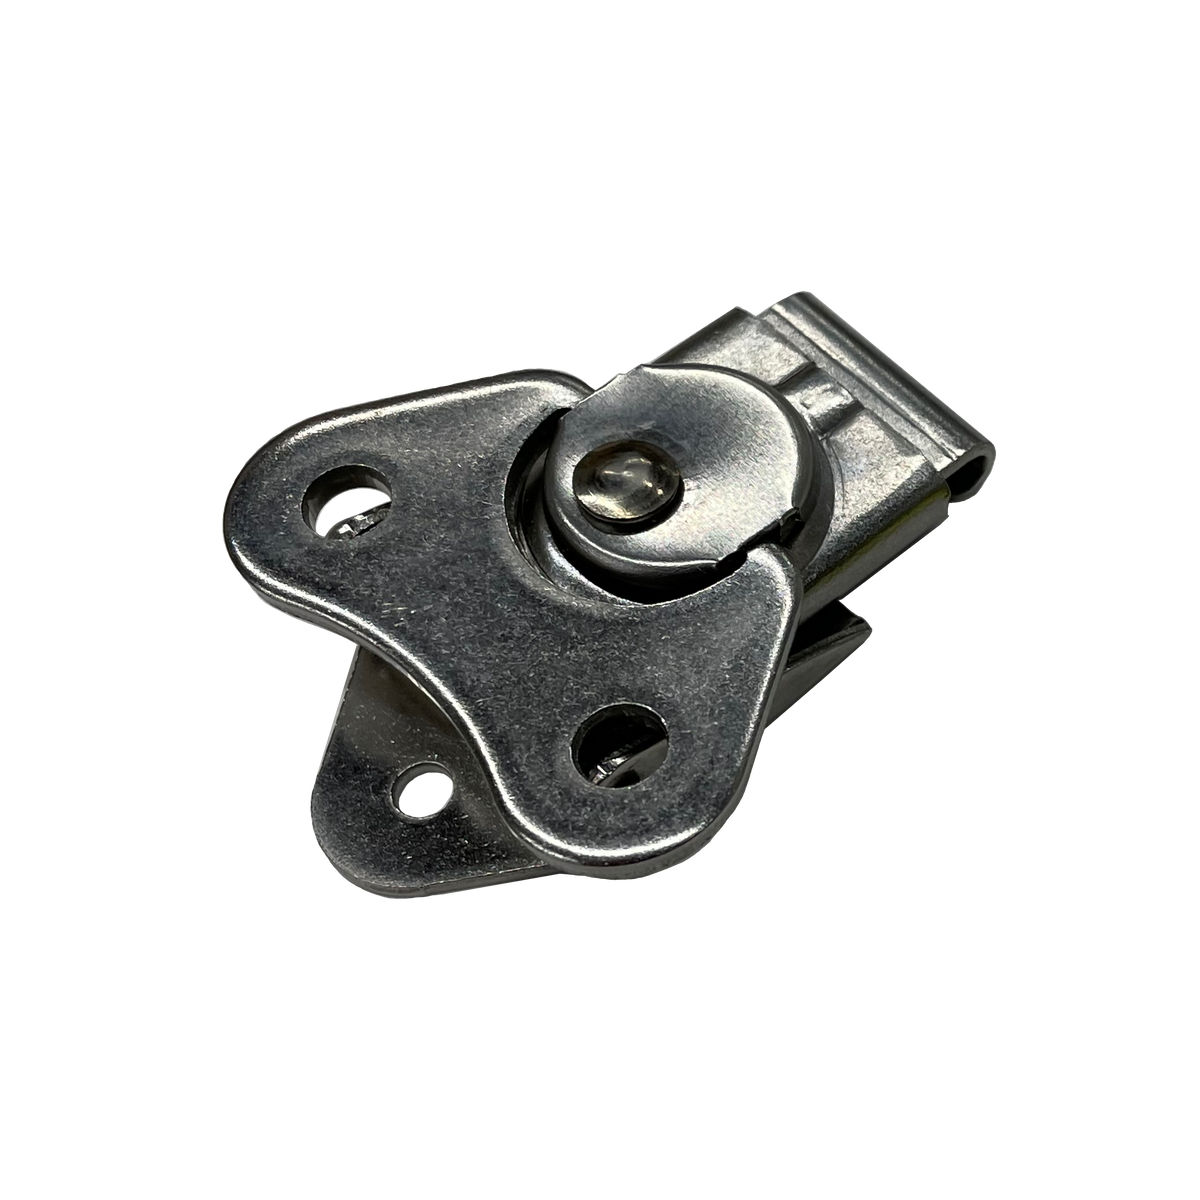 K3 Link Lock draw latch Hinges & Latches